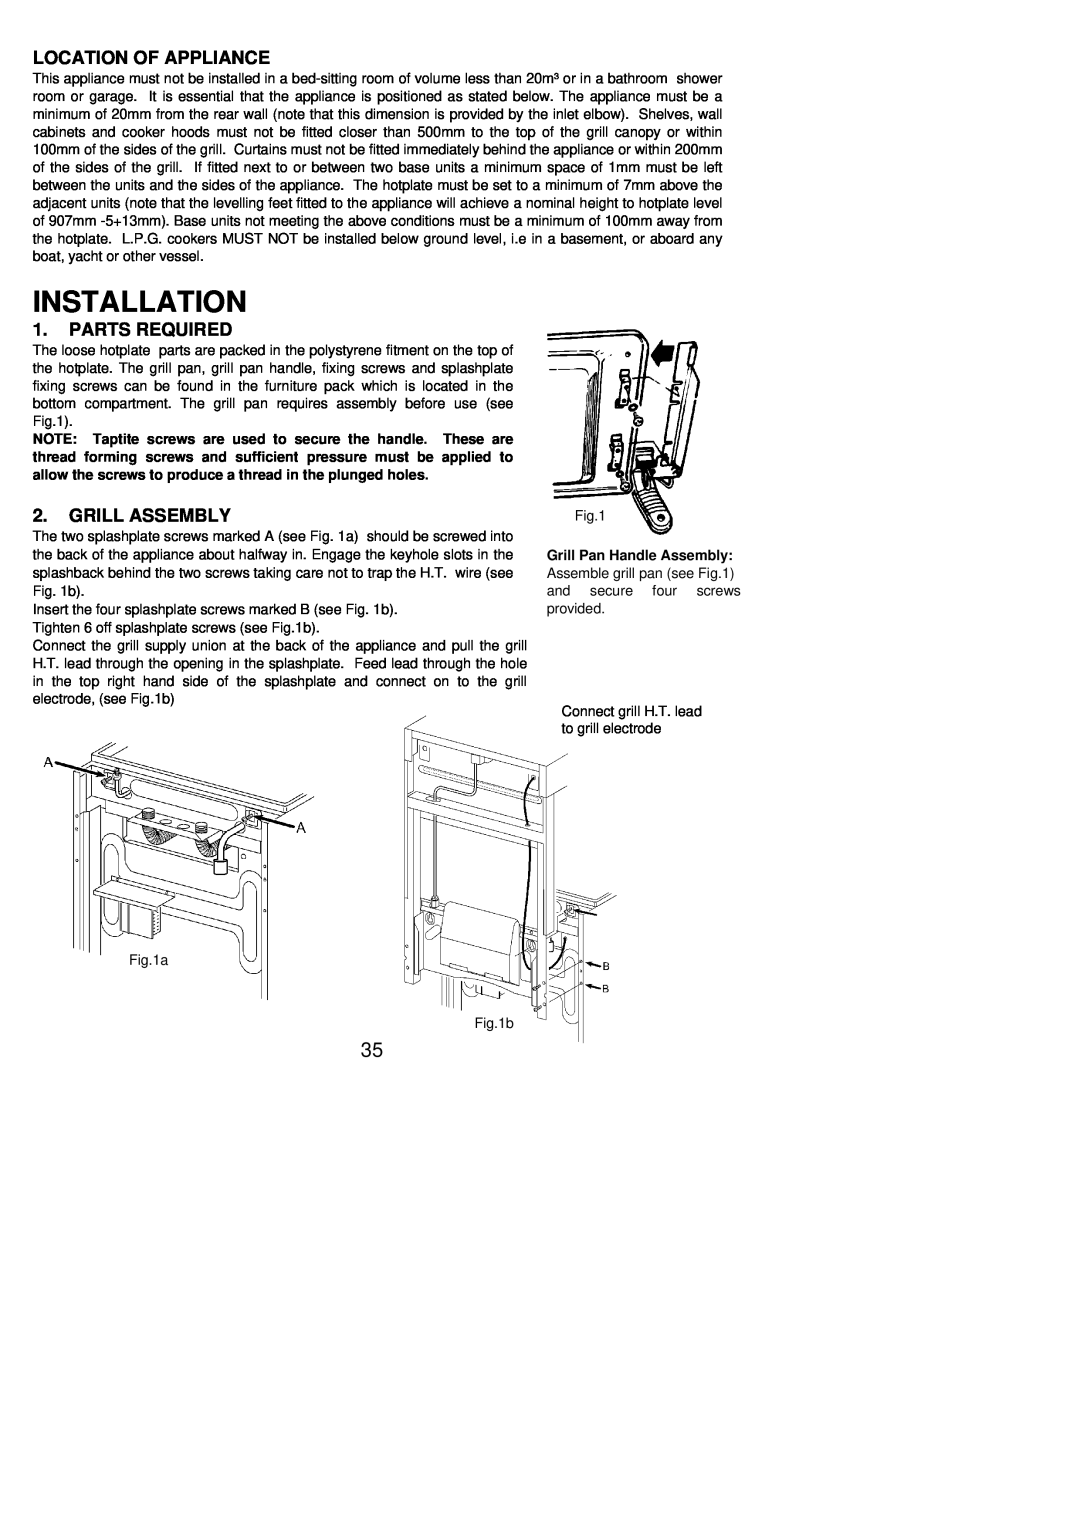 Electrolux 55V installation instructions Installation, Location Of Appliance, Parts Required, Grill Assembly 